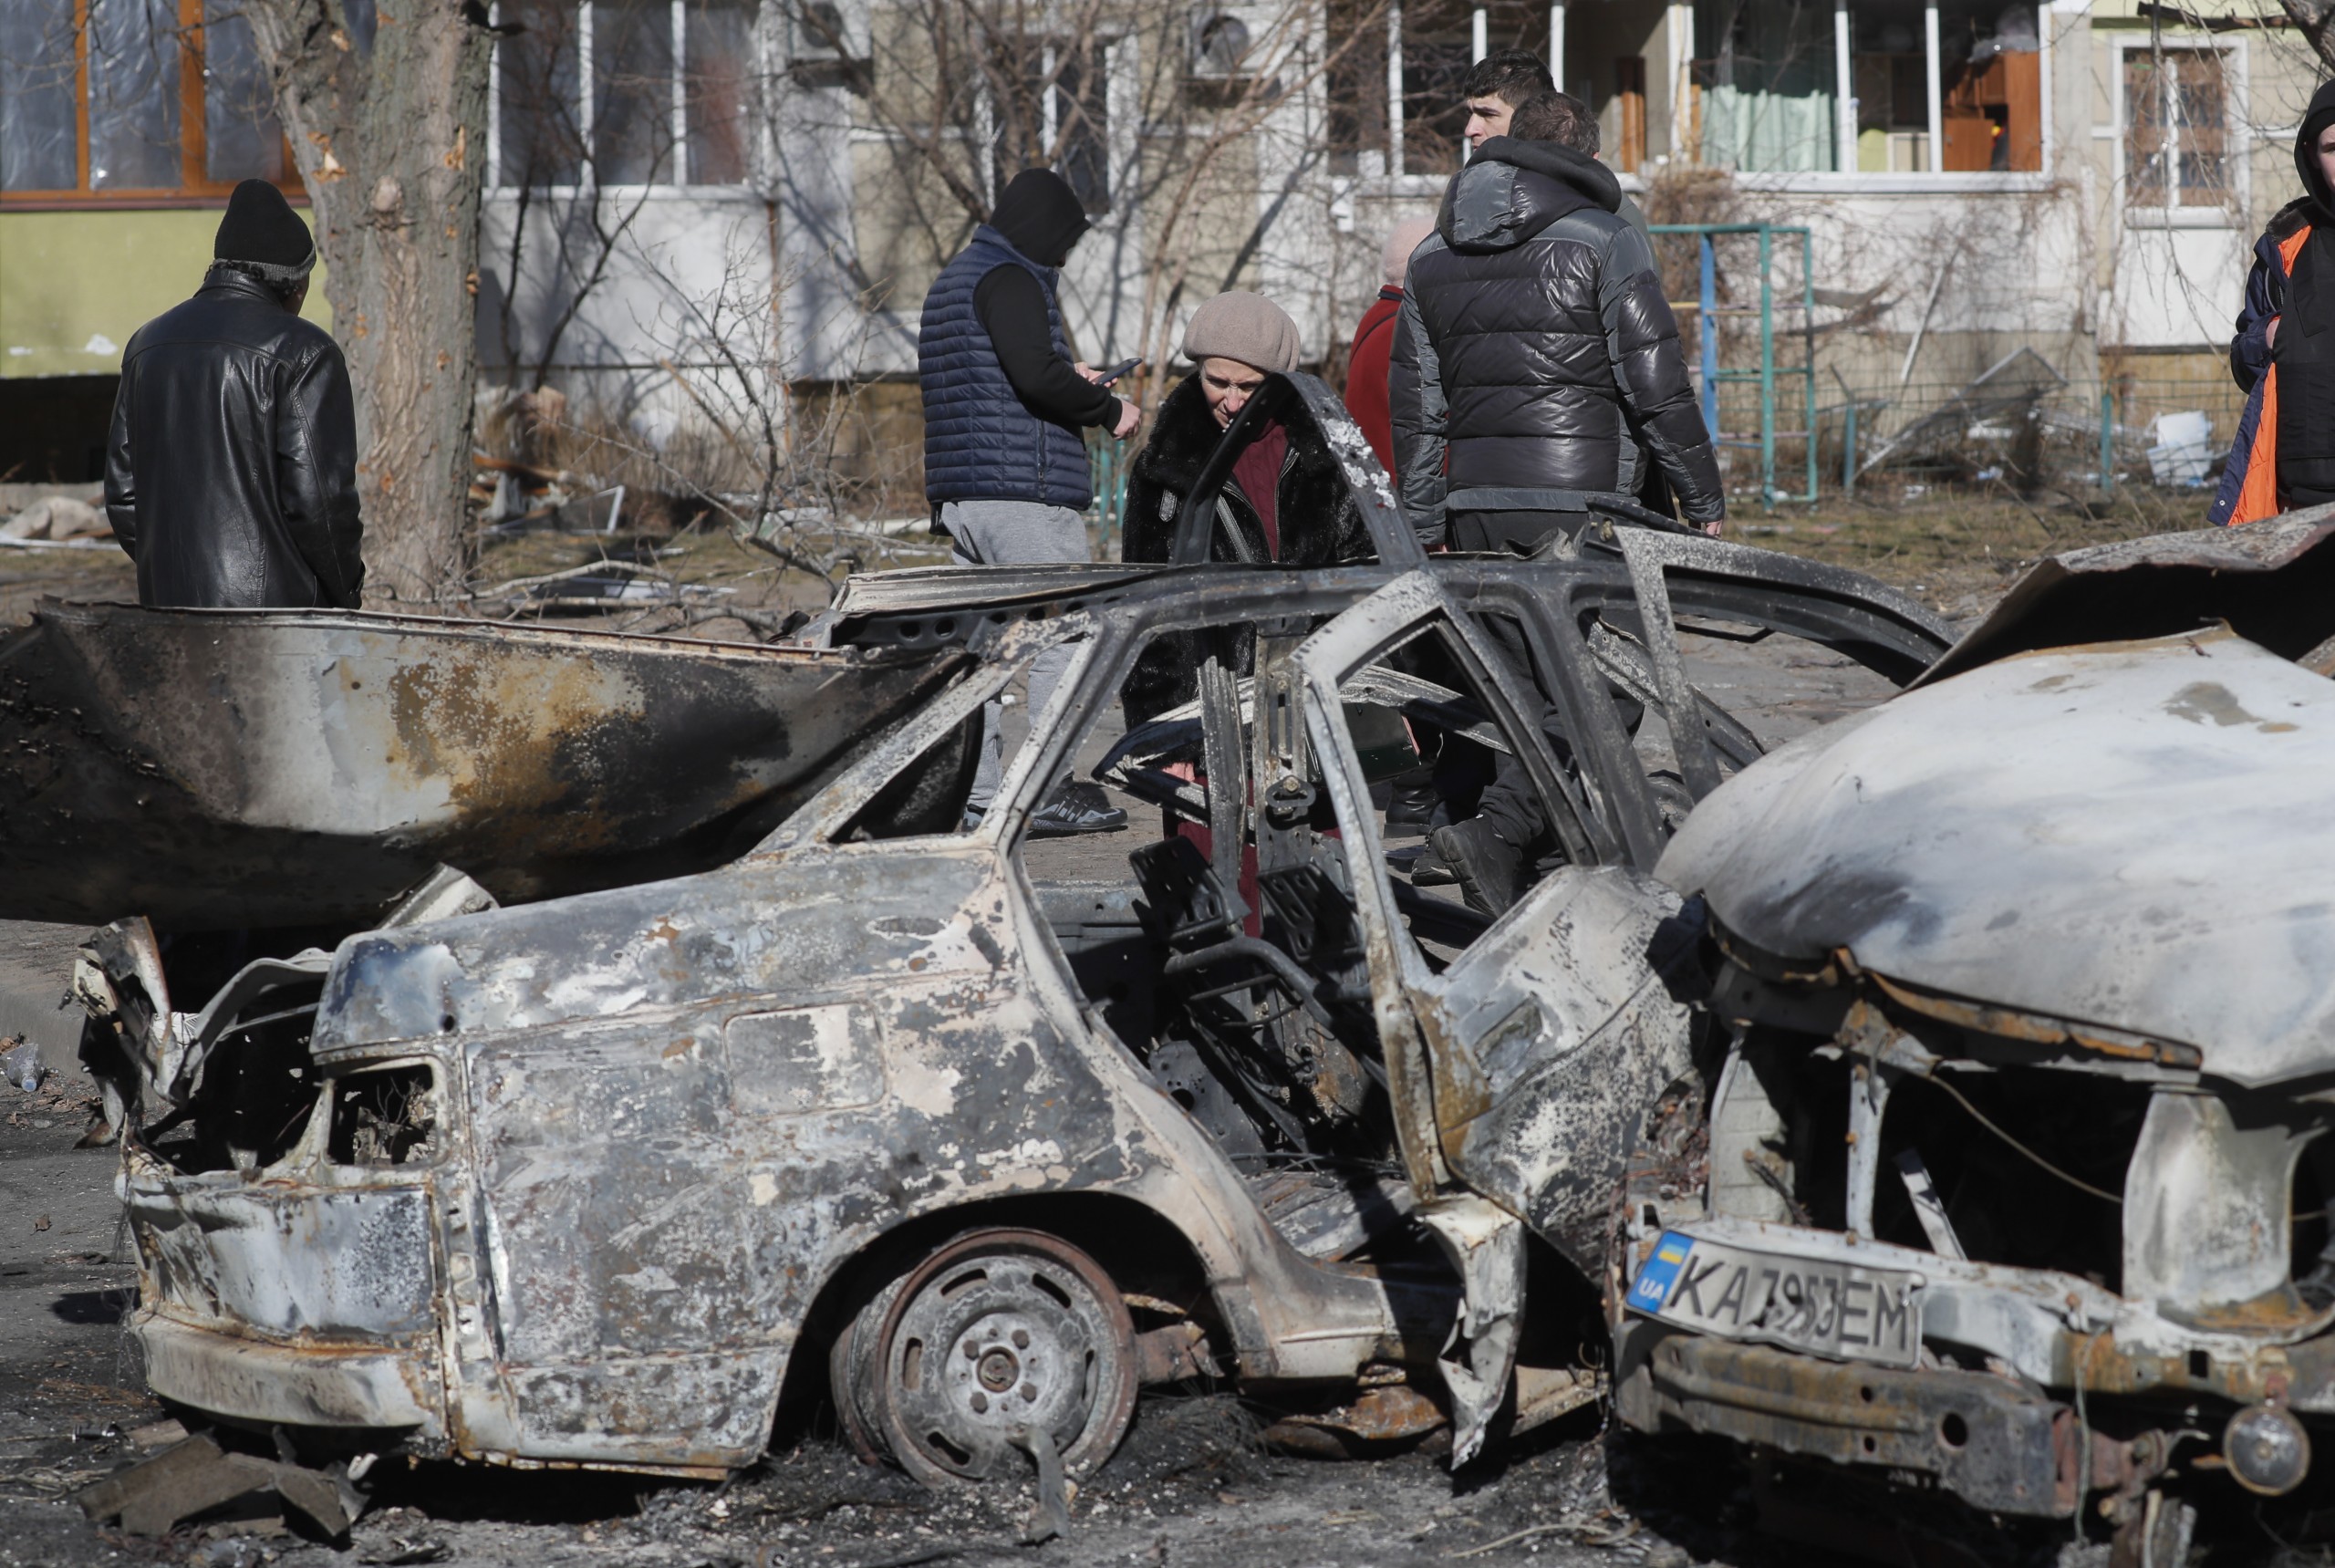 epa09791844 People walk past burned cars a day after a shelling on a residential area in Kiev, Ukraine, 28 February 2022. Russian troops entered Ukraine on 24 February prompting the country's president to declare martial law and triggering a series of severe economic sanctions imposed by Western countries on Russia.  EPA/SERGEY DOLZHENKO